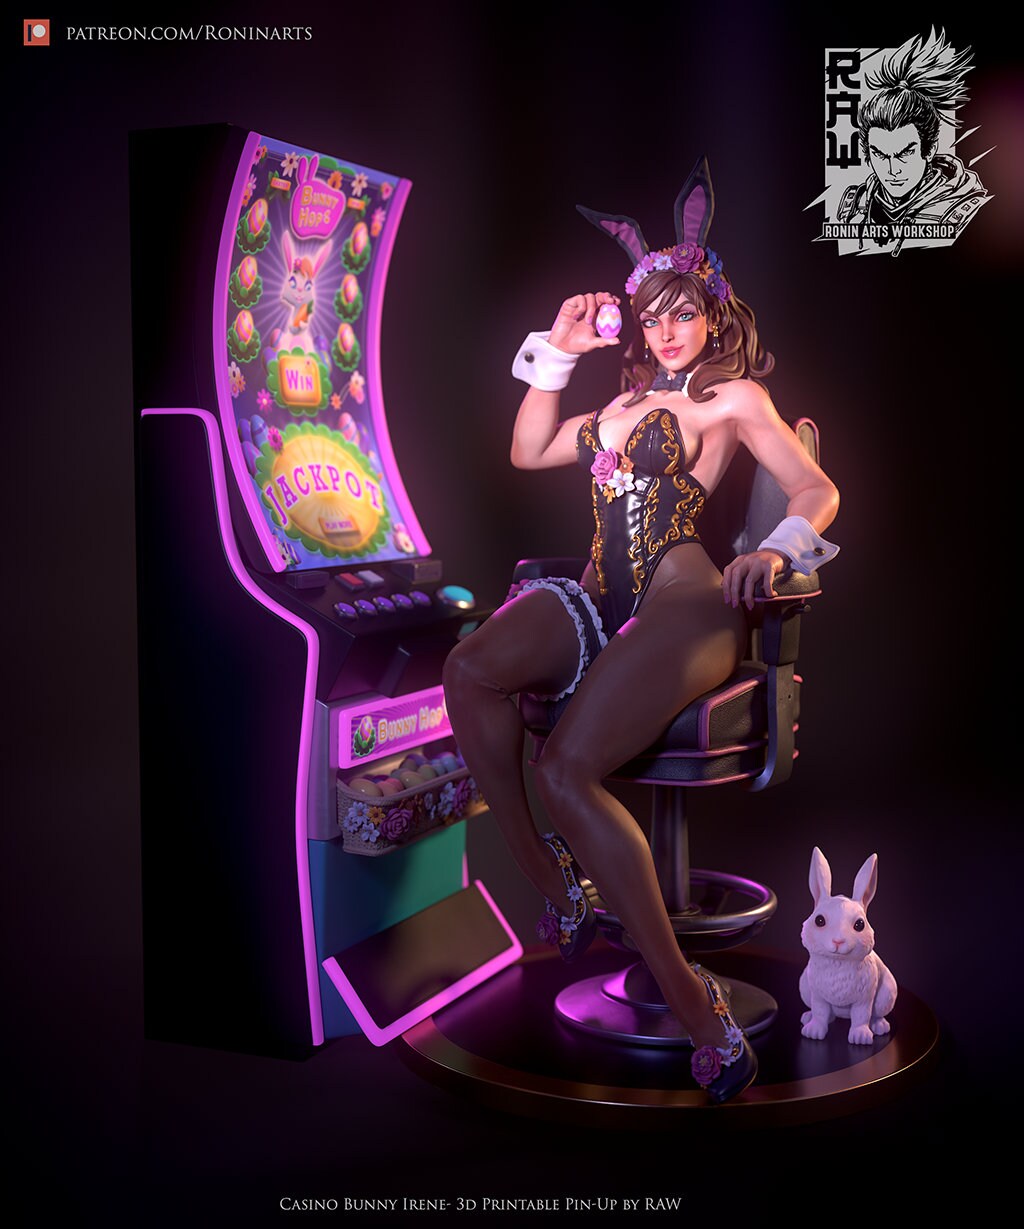 Jackpot Pin-up | Casino Hostess Irene | Clothed or Nude | Resin 3D Printed Pinup | Ronin Arts Workshop